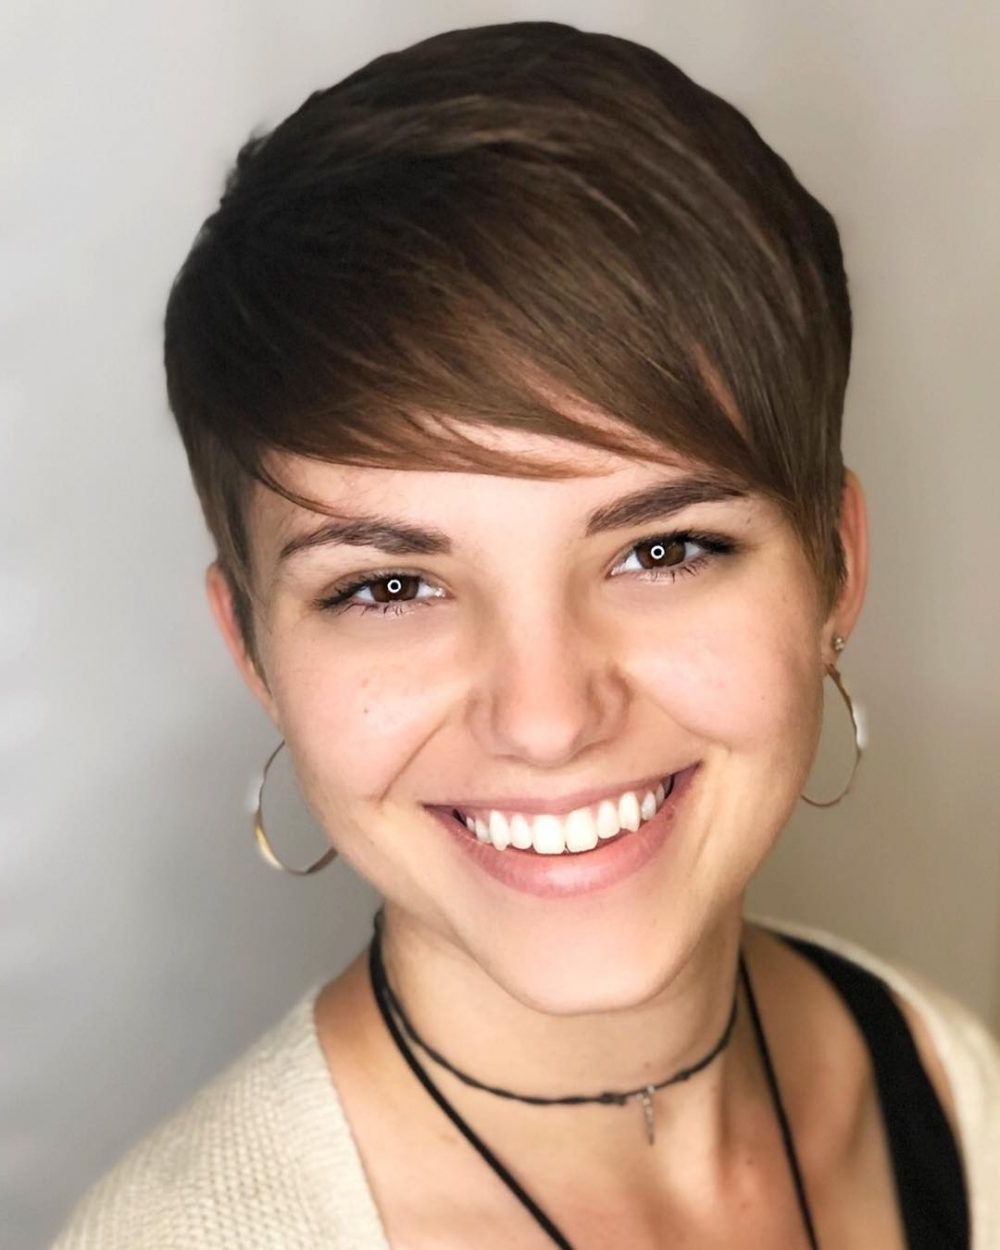 33 Flattering Short Hairstyles For Round Faces In 2018 Intended For Flattering Short Haircuts For Round Faces (View 5 of 25)